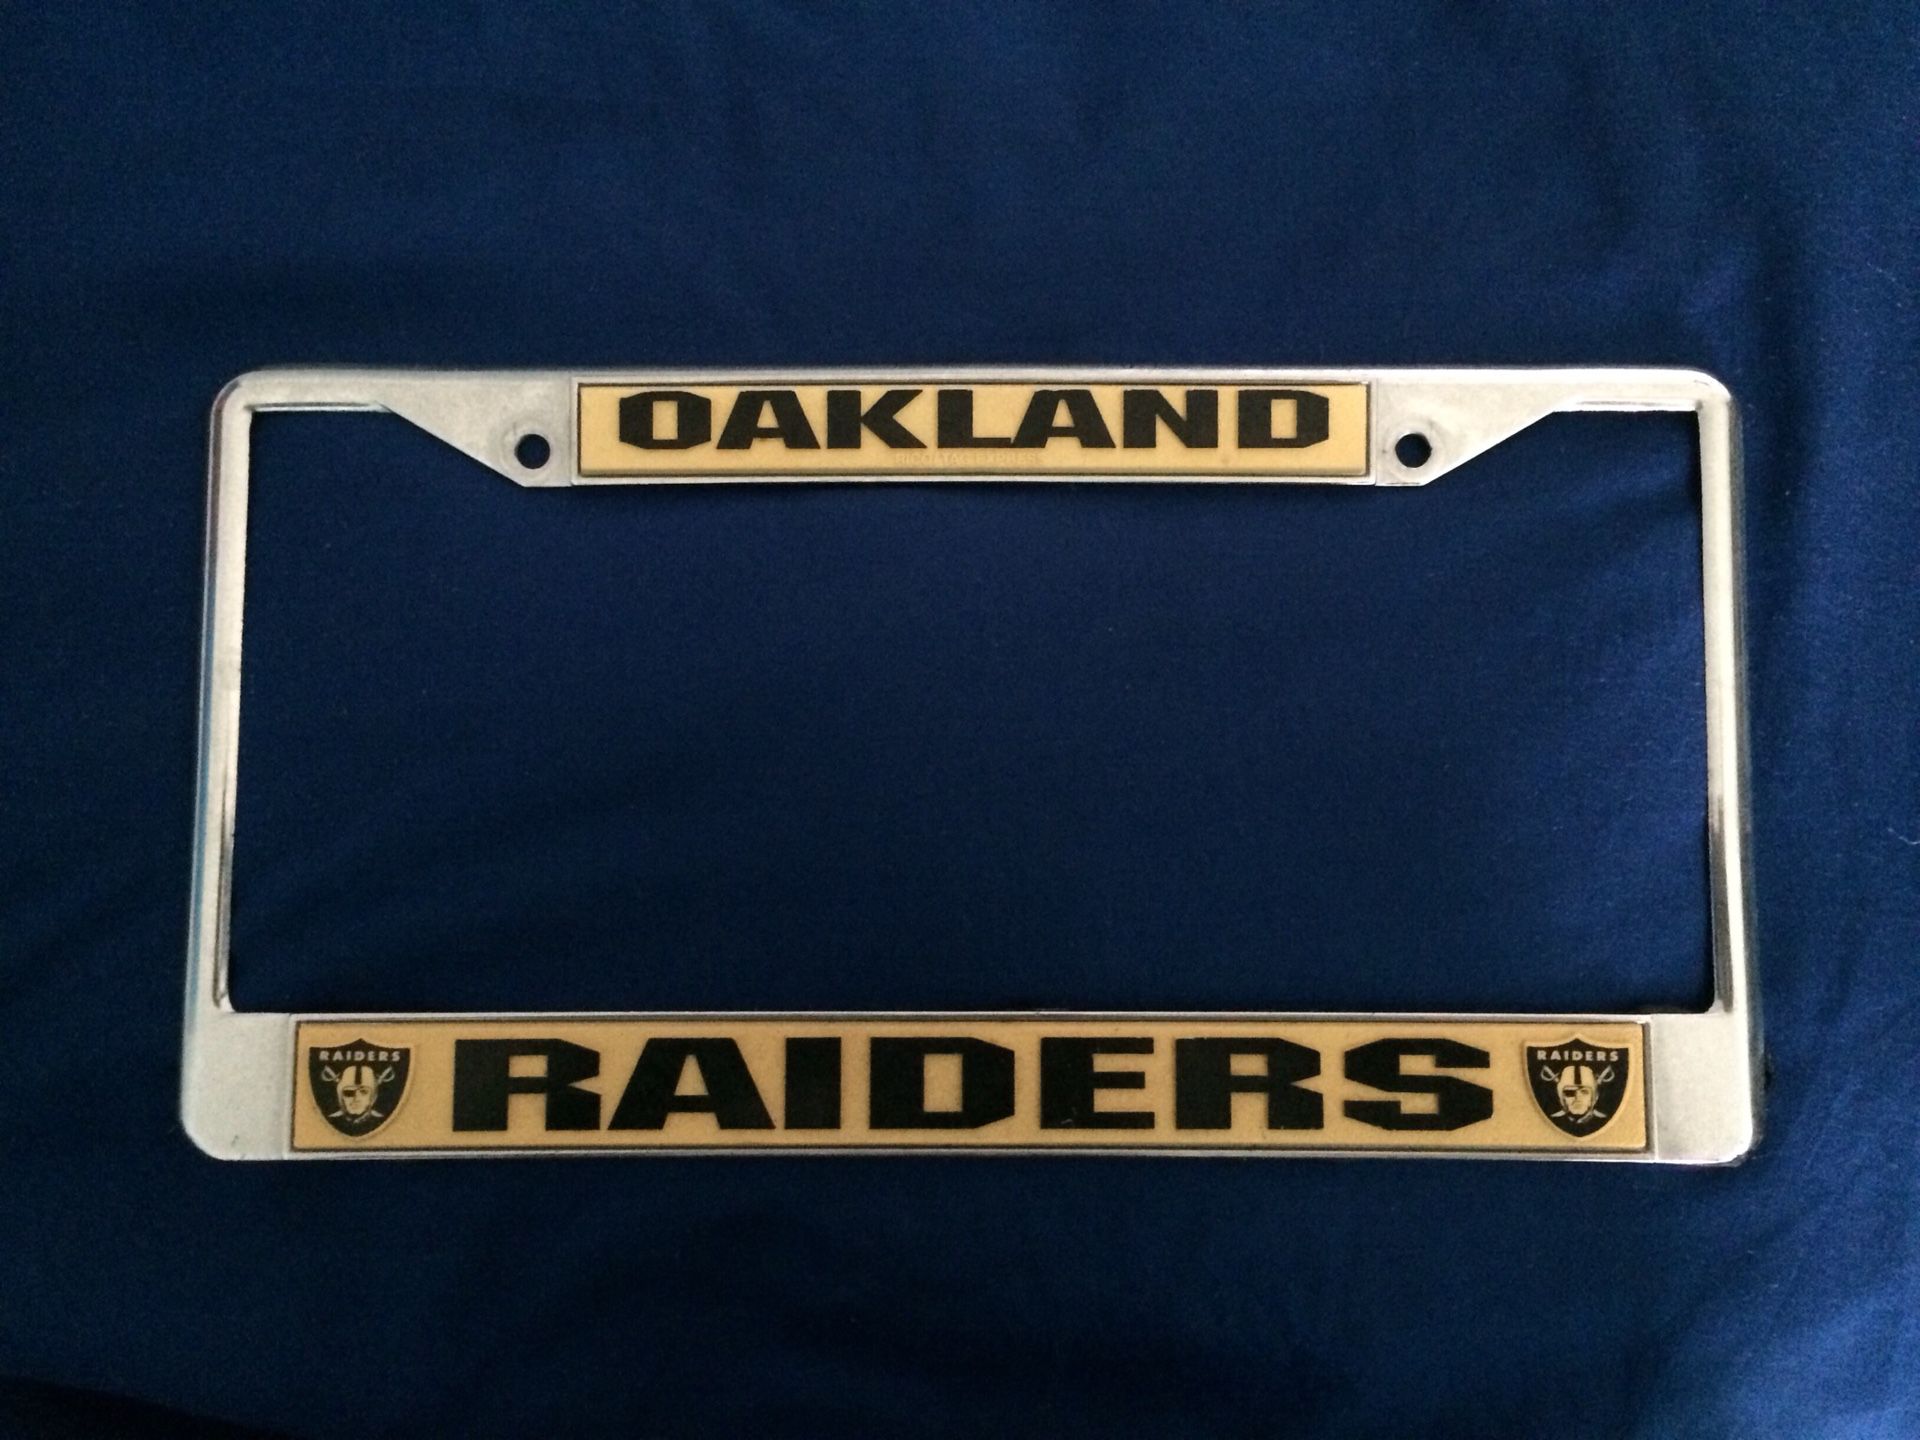 Las Vegas Raiders Metal License Plate Frame for Sale in West Covina, CA -  OfferUp